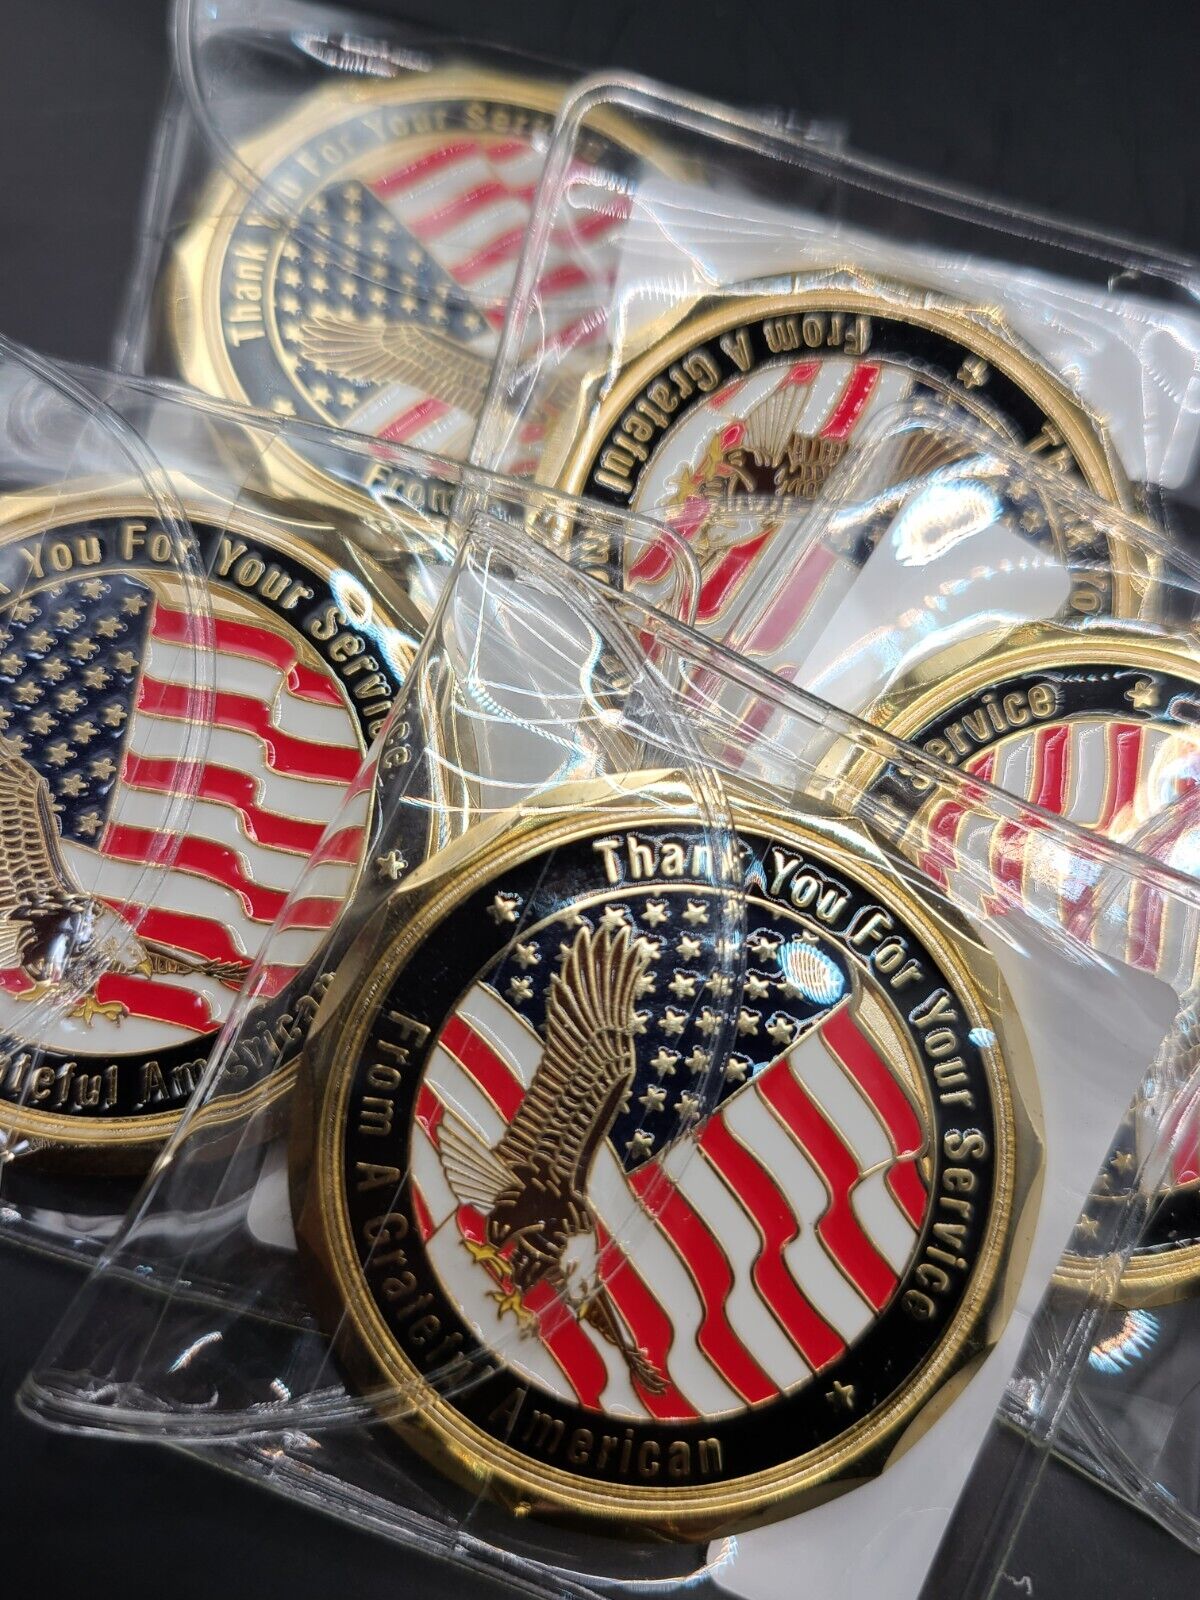 5x To A Member of Our U.S. Armed Forces From A Grateful American Challenge Coin